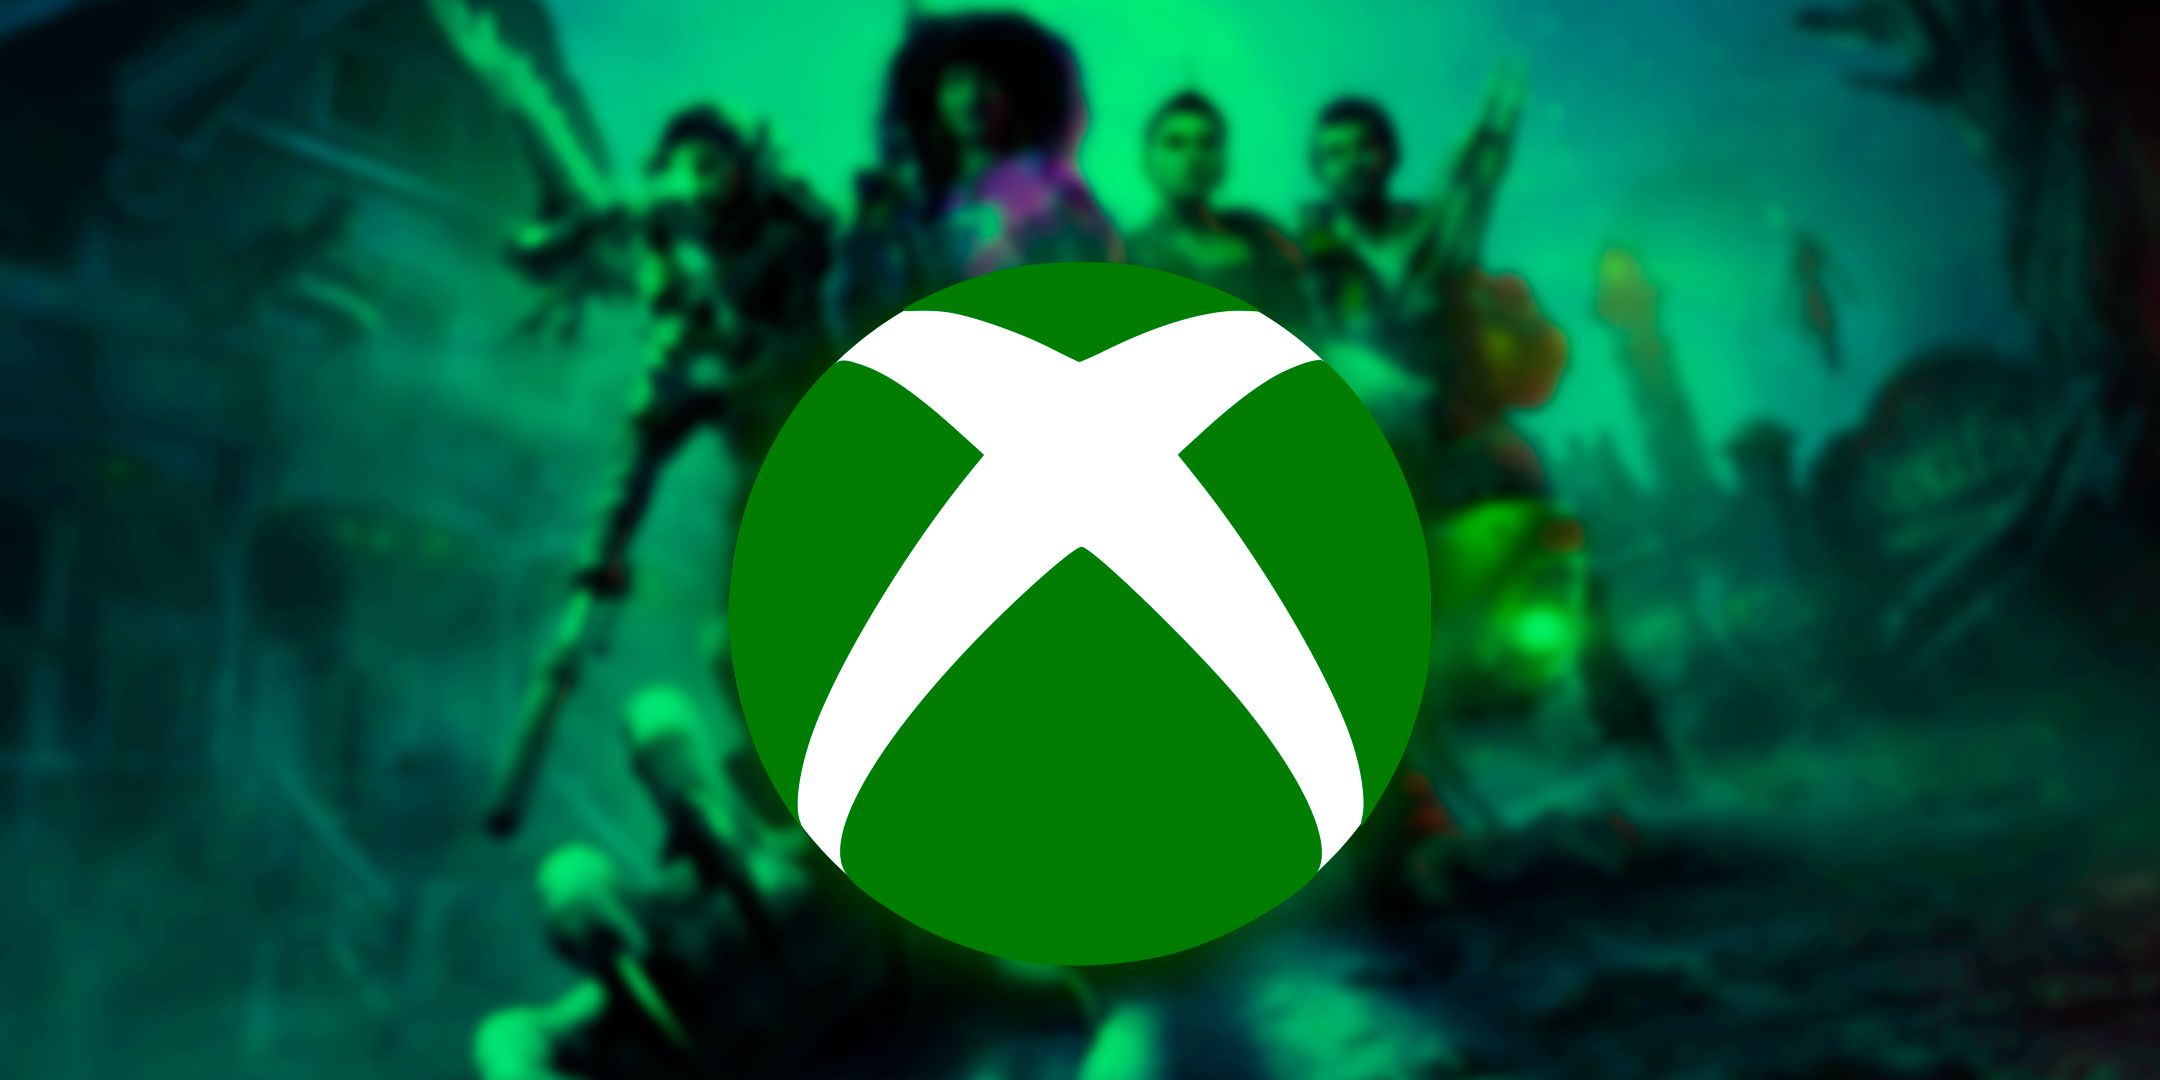 Xbox logo over a green tinted background of the cover art for Redfall